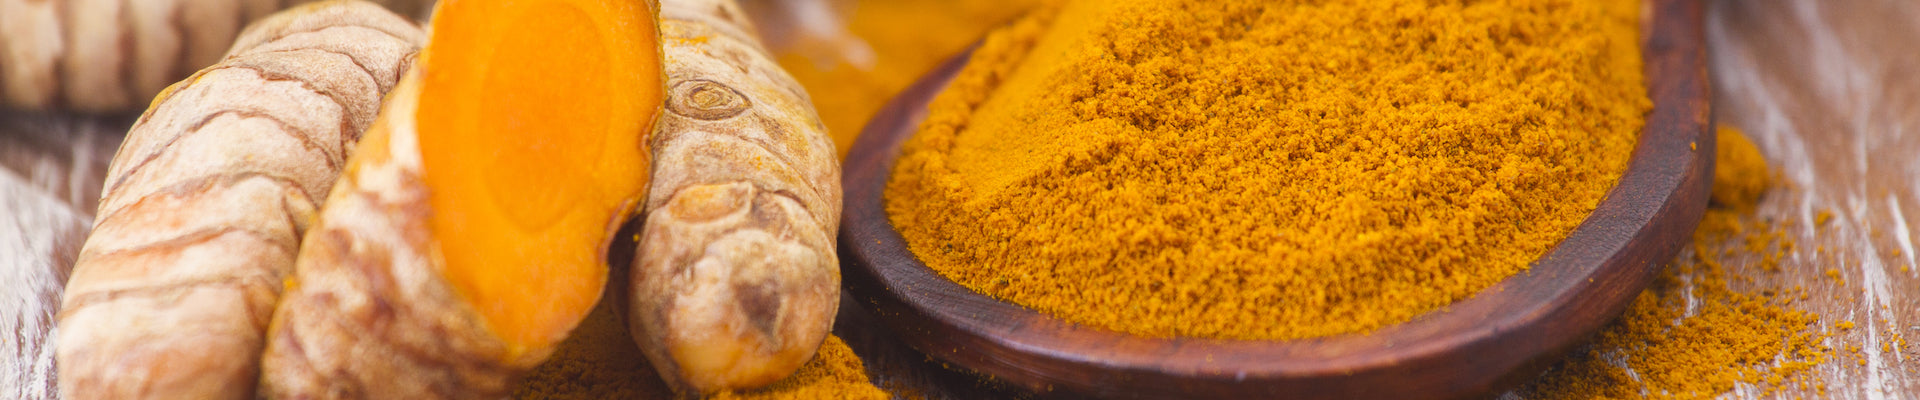 The Curcumin Craze Is Real: Here Are 6 Reasons Why